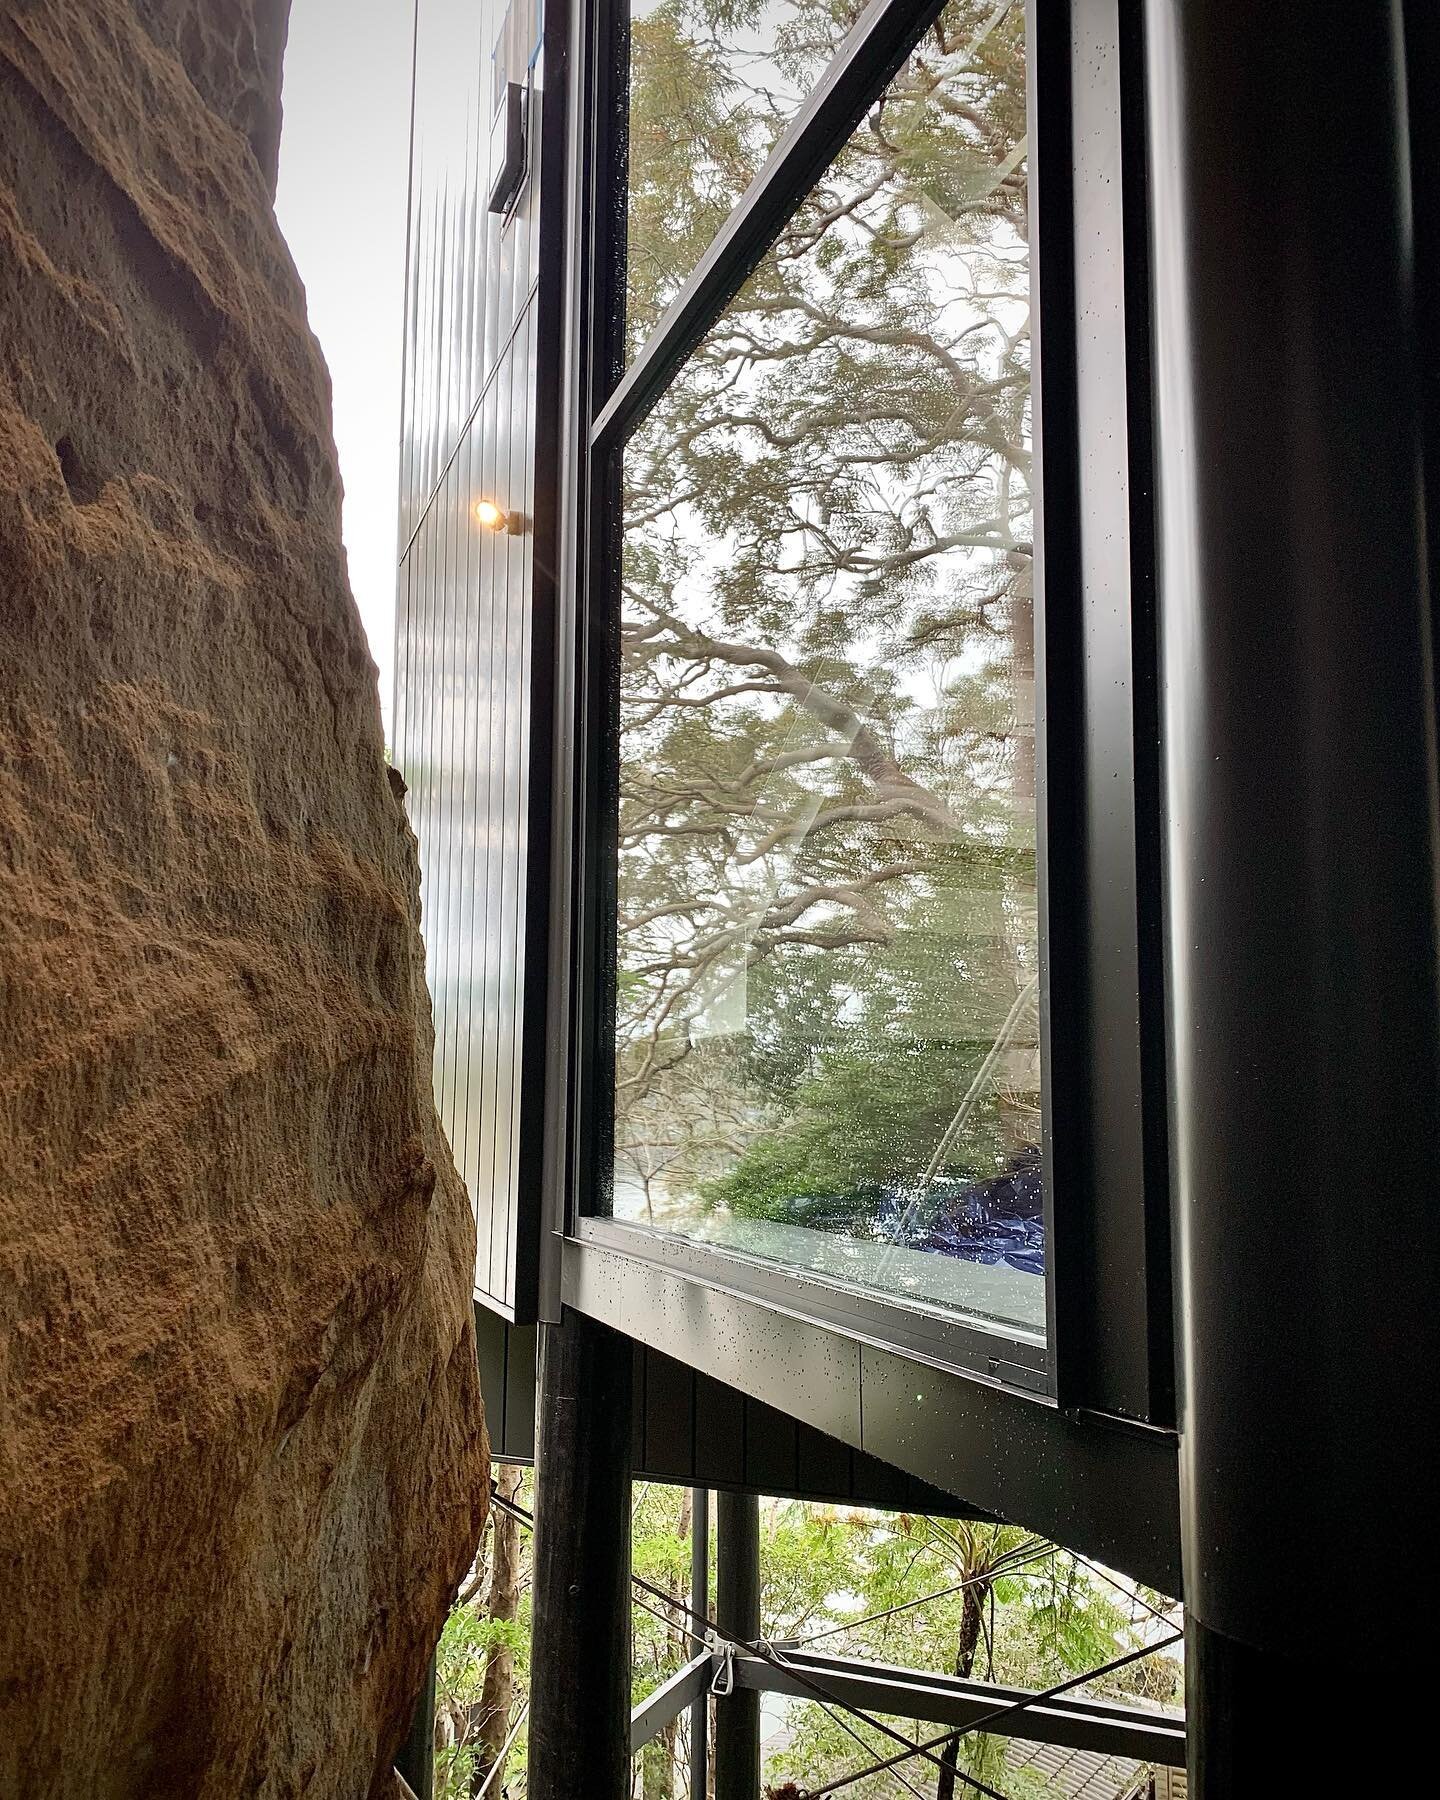 Some exterior moments at the tree house this morning in dreary and cold conditions&hellip;
@buildbydesign.bbd 🔨 &hellip;
@cantileverengineers 📐&hellip;
#treehouse #polehouse #cliff #steepsite #sandstone #architecture #design #sydneydesign #defects 